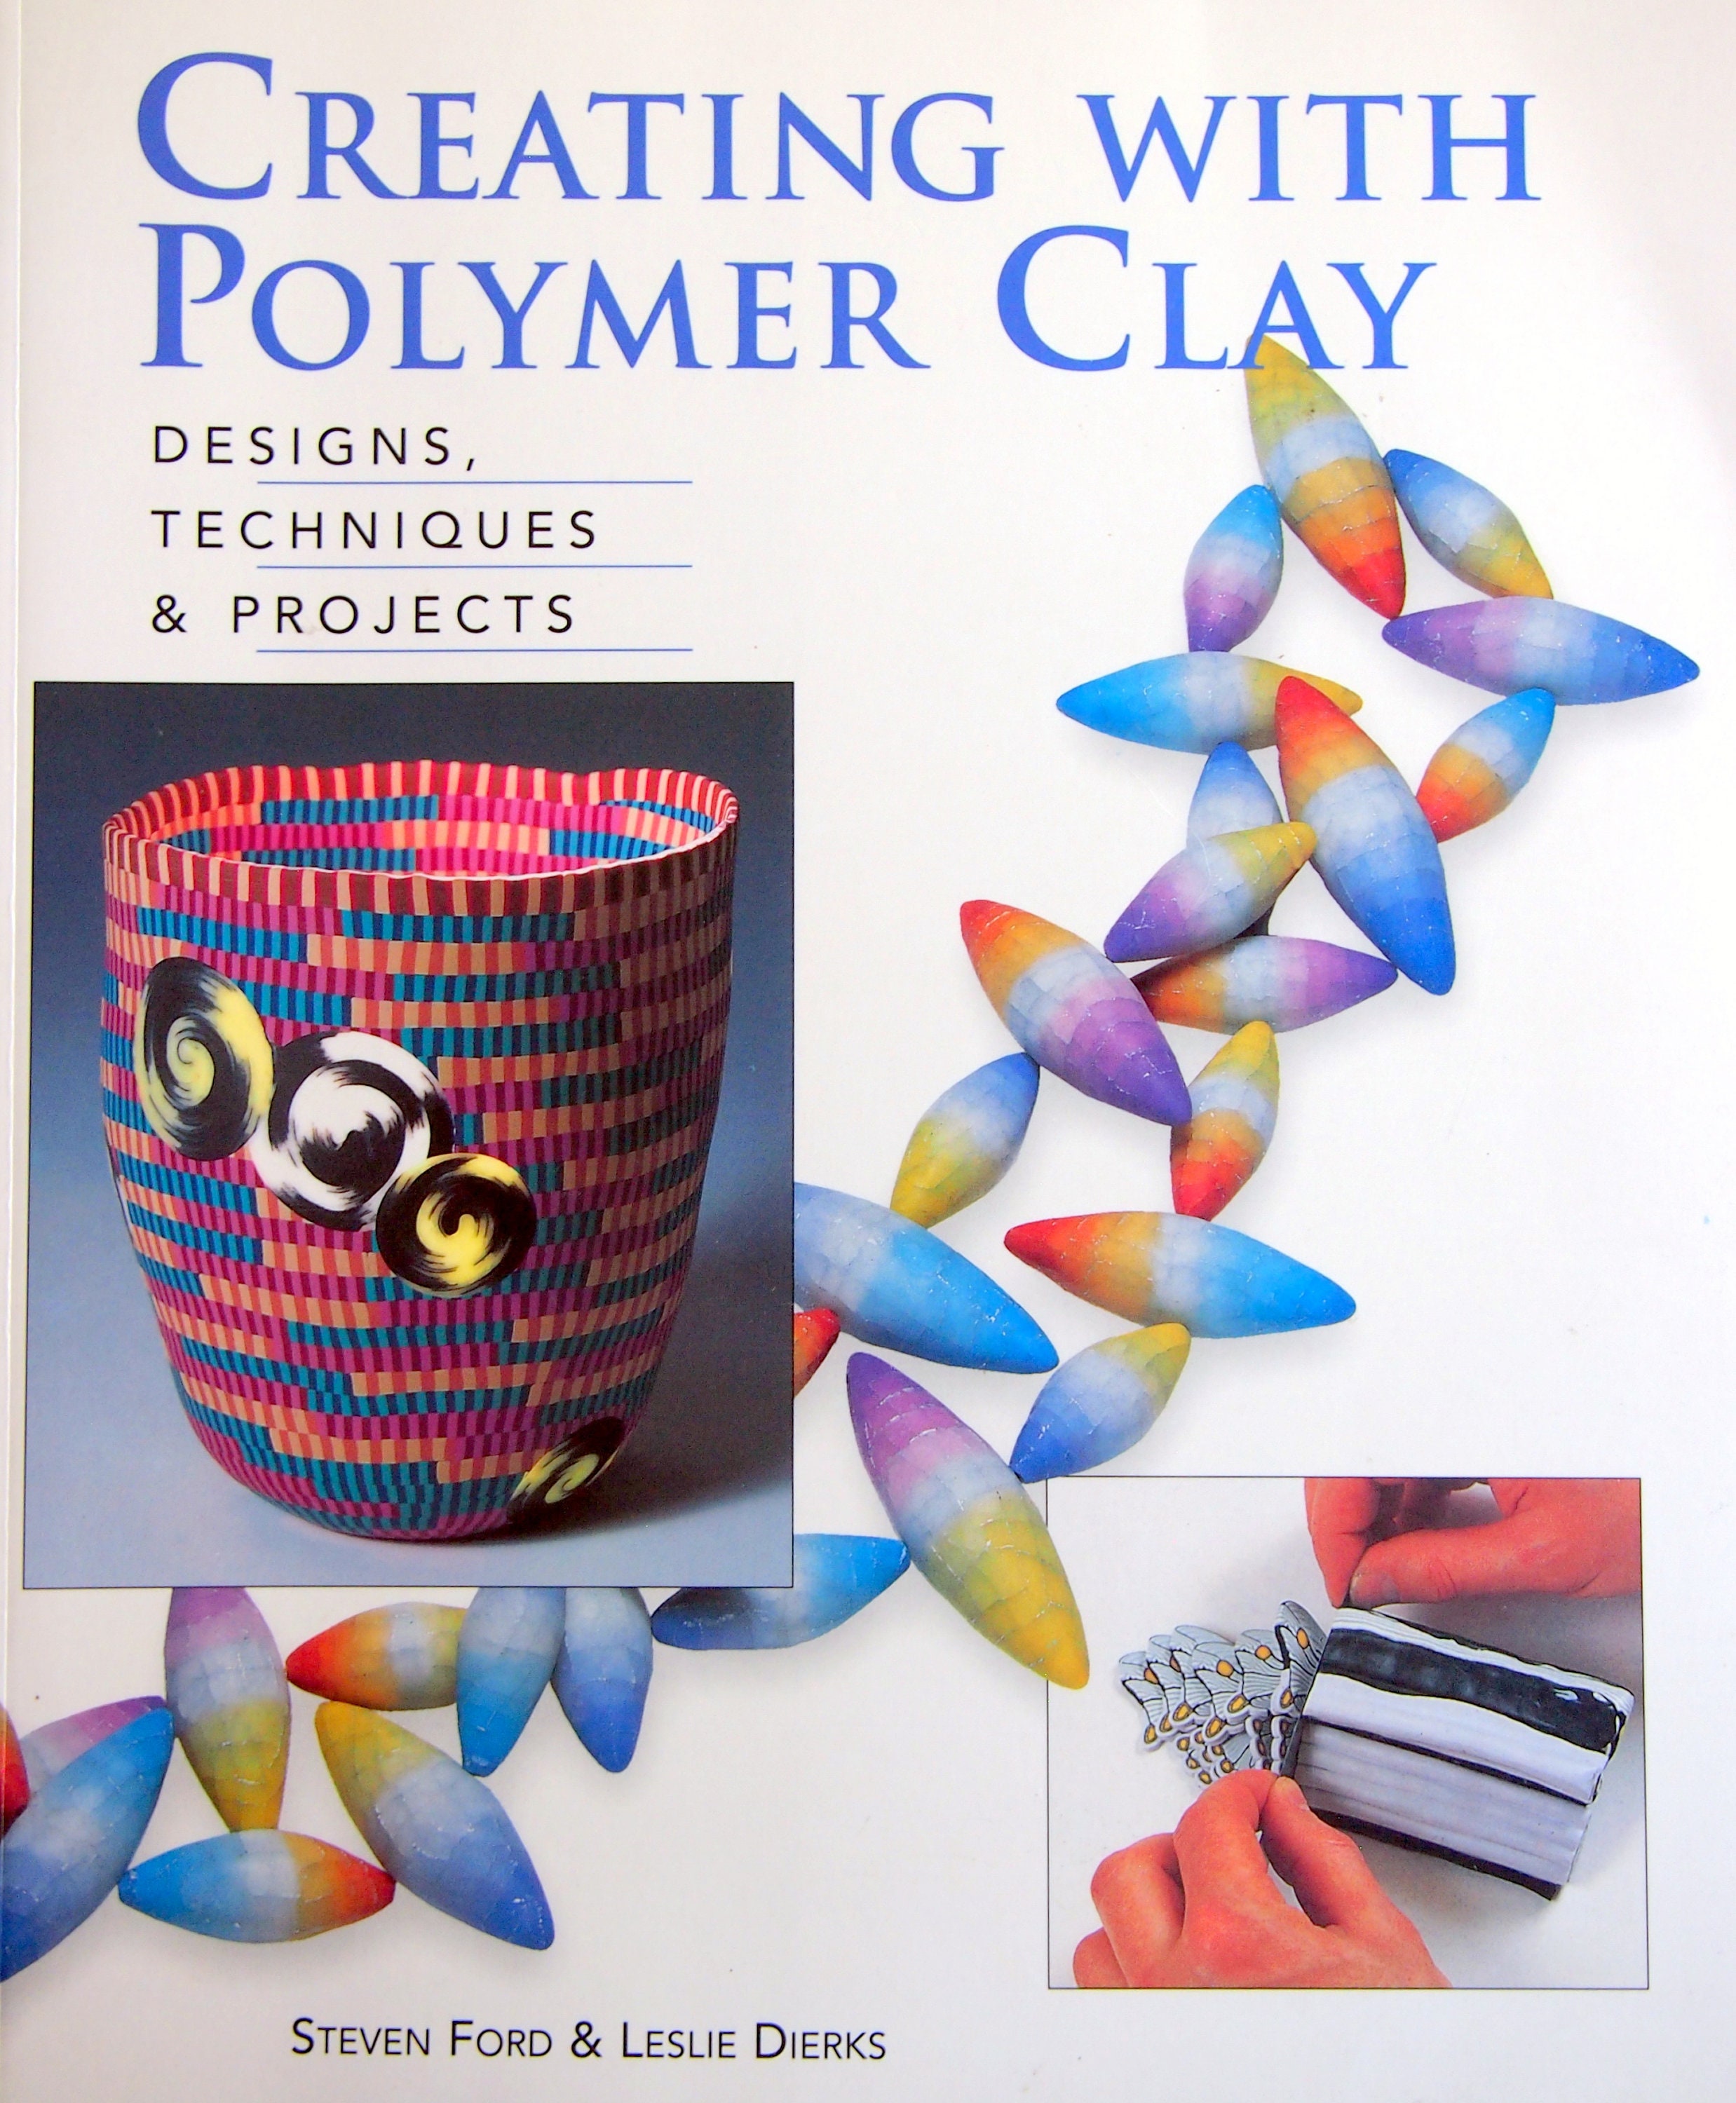 Exploring Canework in Polymer Clay : Color, Pattern, Surface Design  (Paperback)